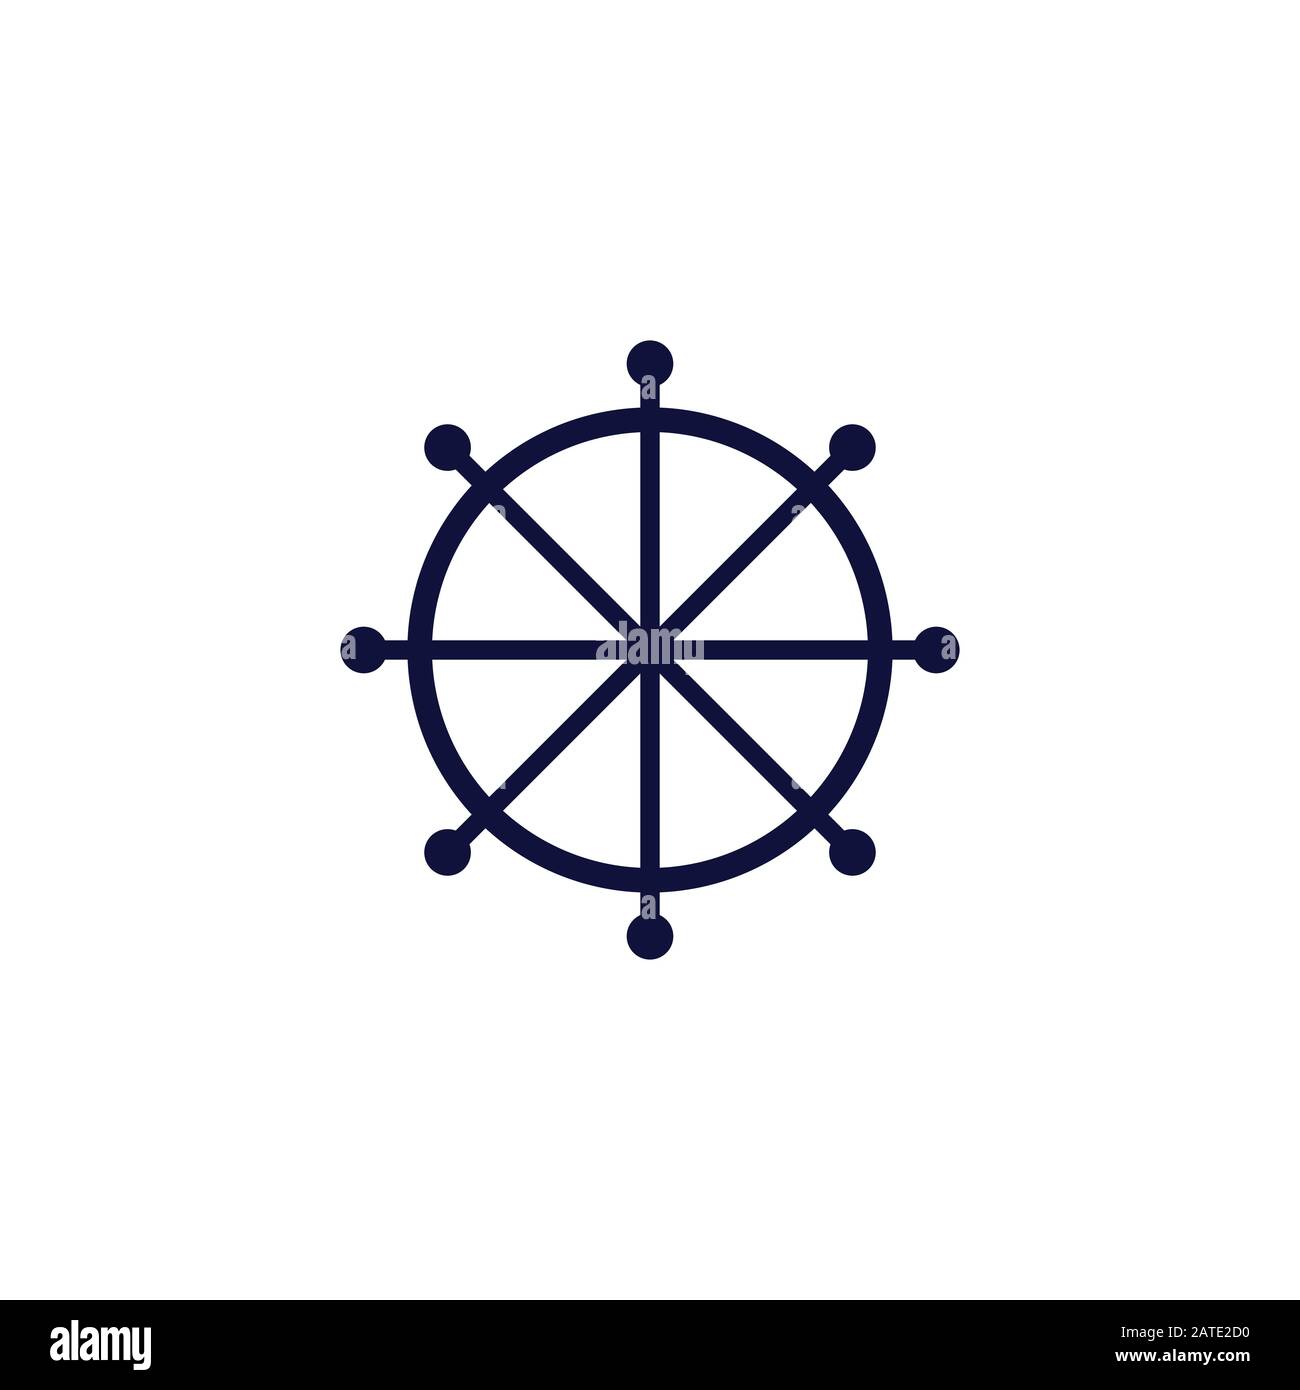 Ship s wheel icons for marine design, four types of colorful round icons,vector illustration EPS 19 Stock Vector